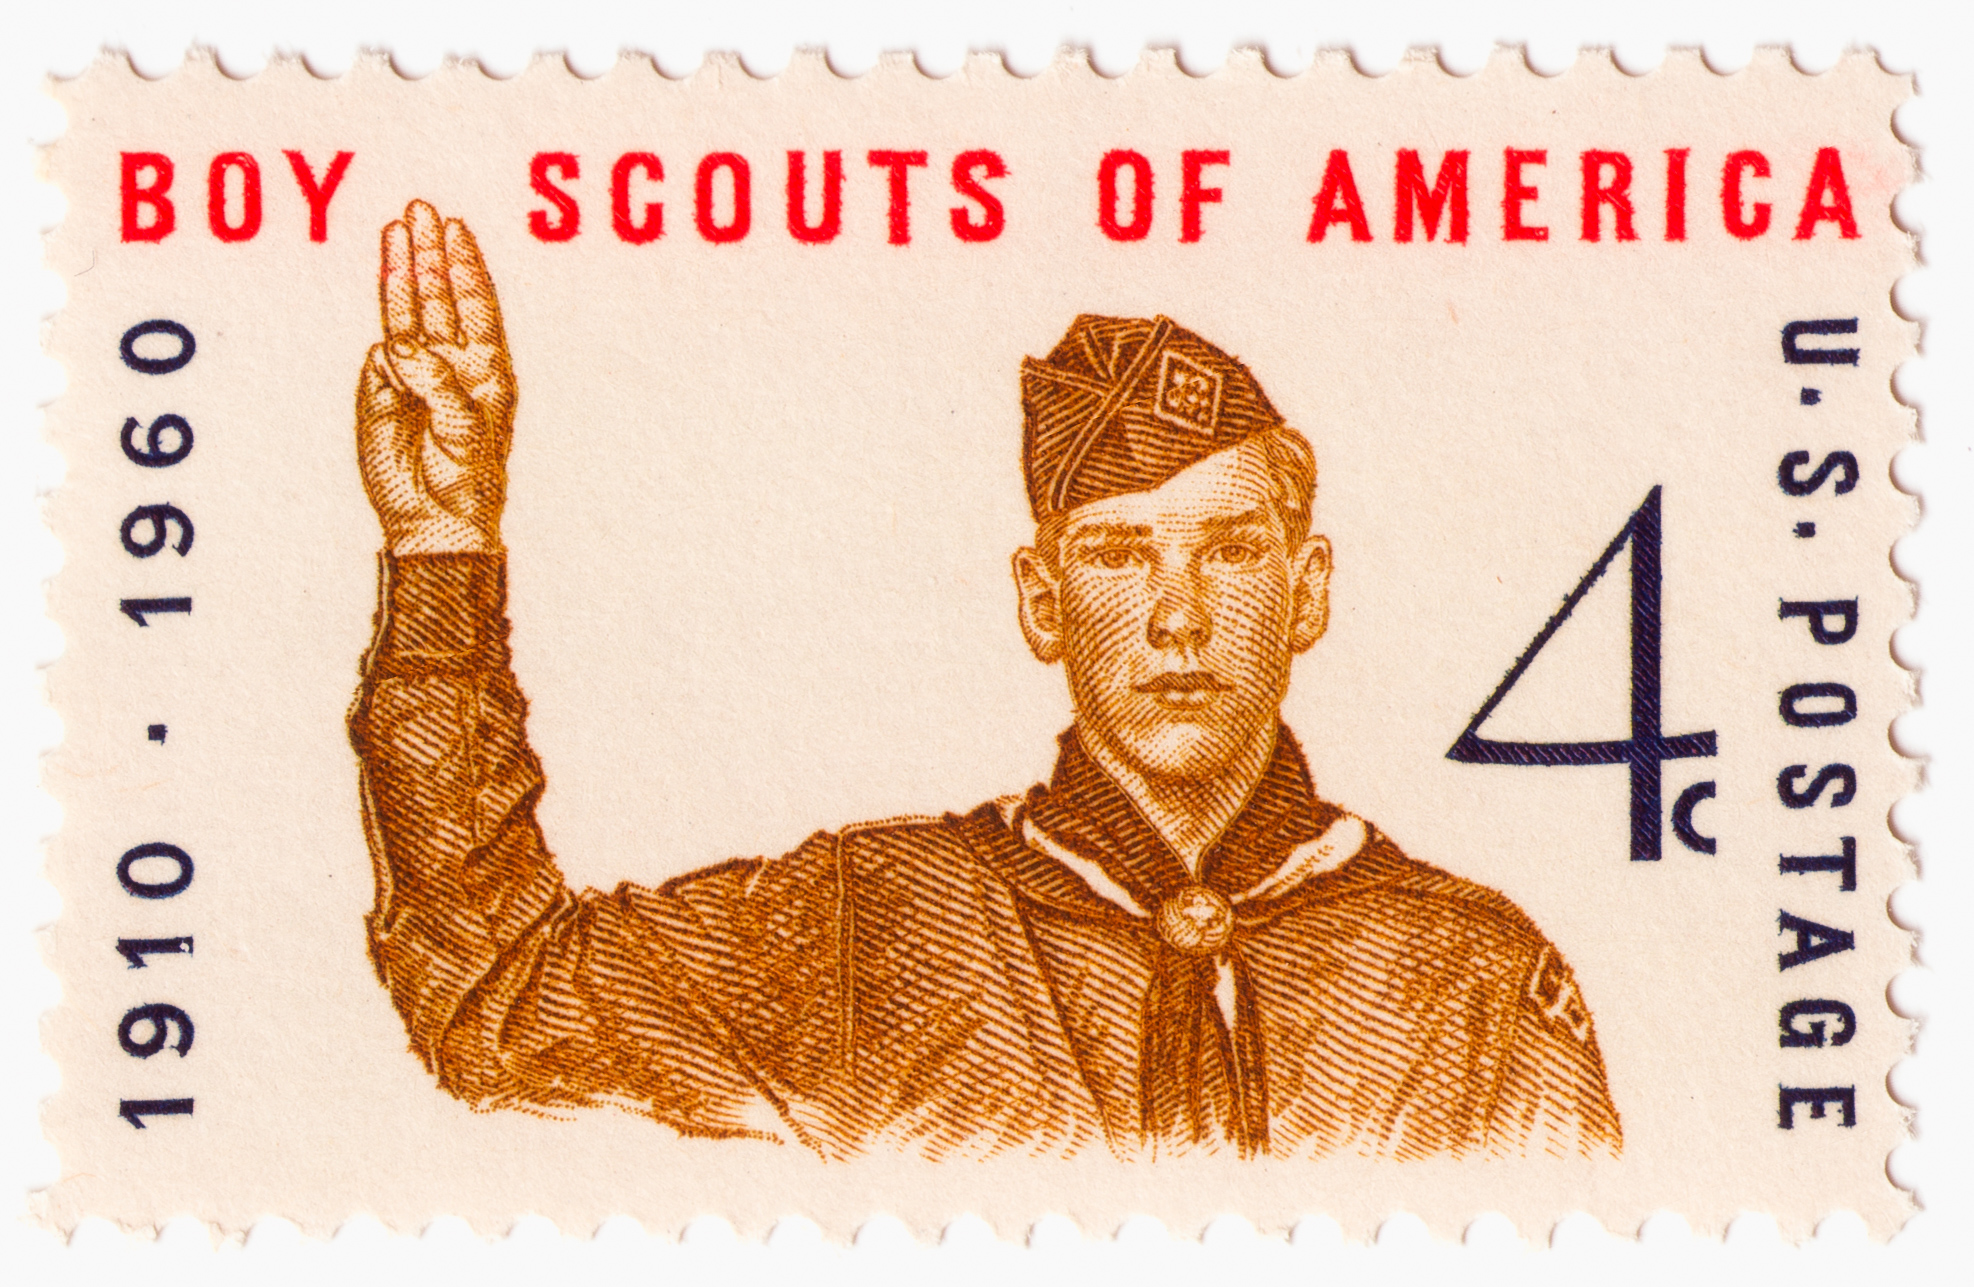 50th Anniversary of Boy Scouts of America (1960)